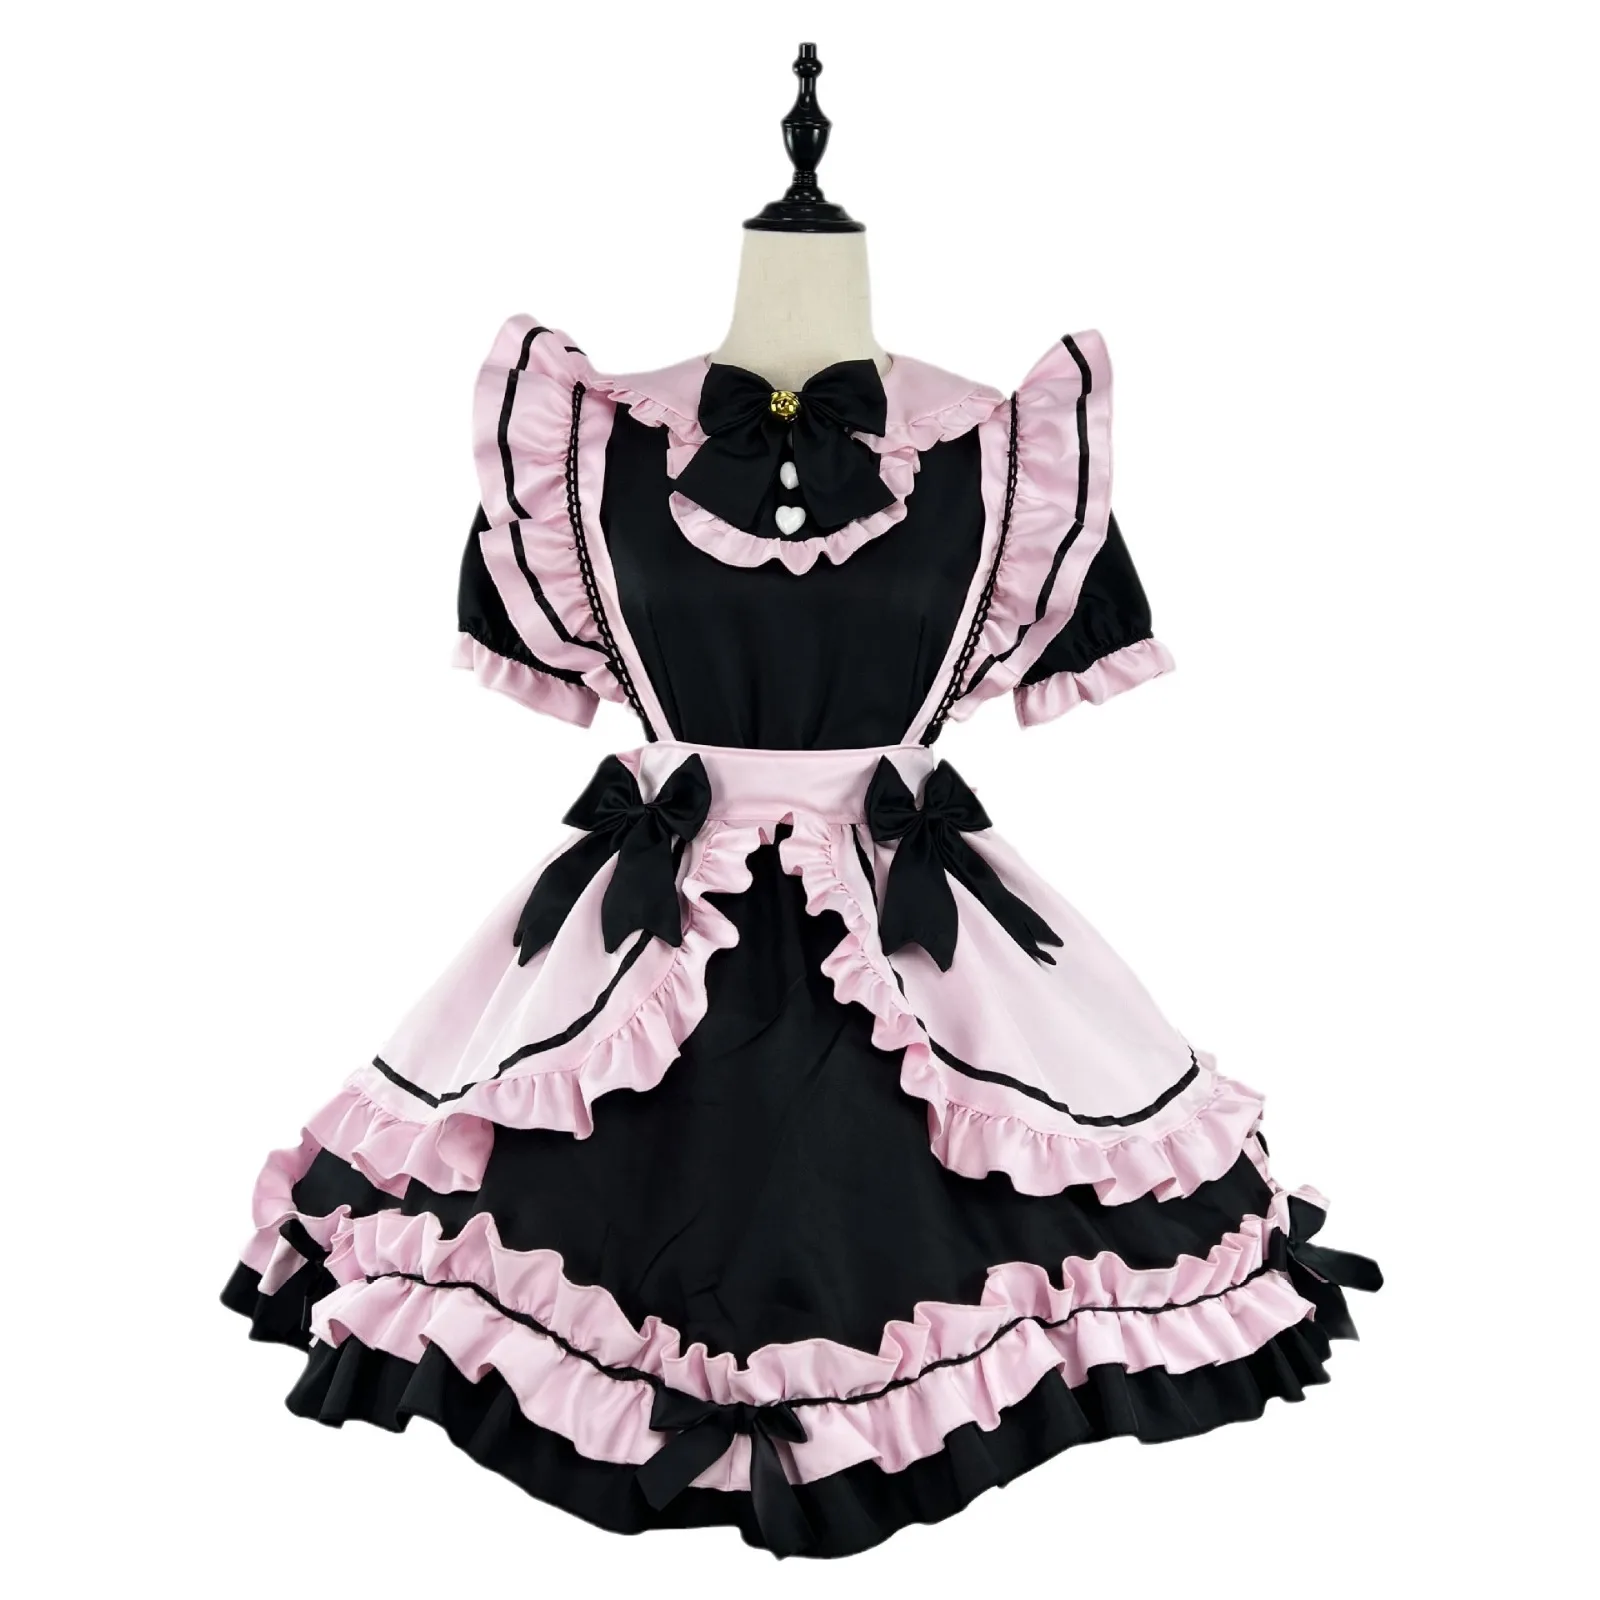 

Anime Black Cat Lolita Maid Dress Cosplay Costume Girl Bowknot Maid Dress Trending Girls Maid Party Costumes S -5XL